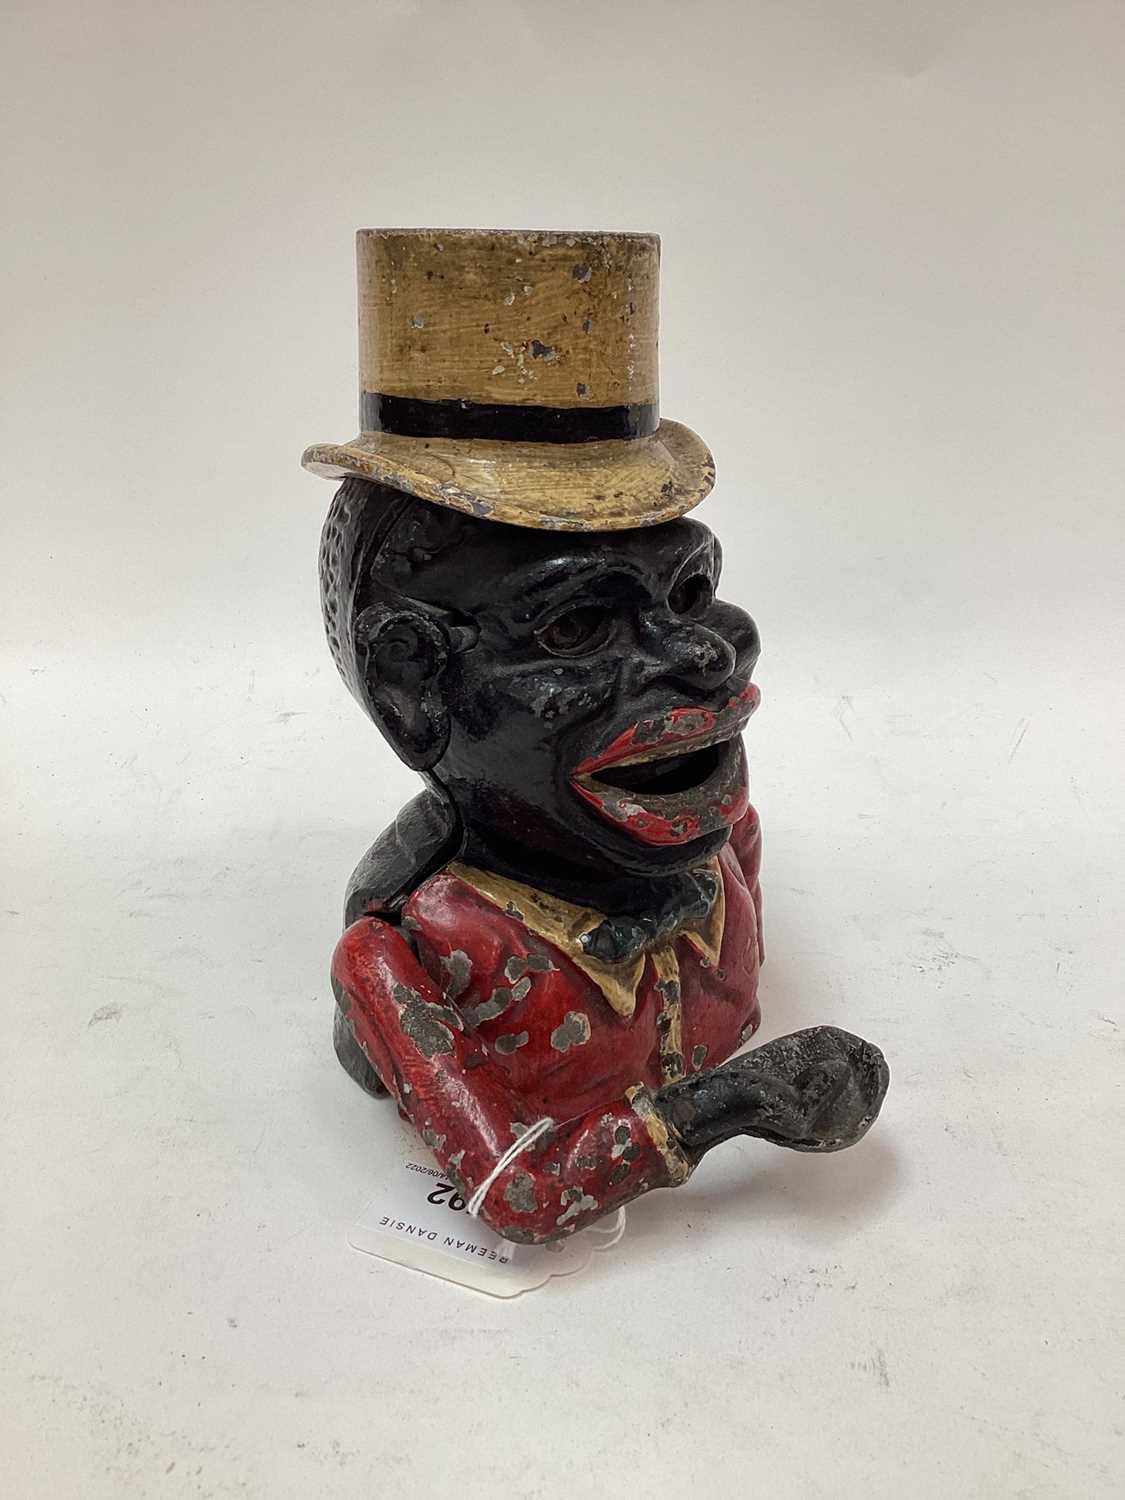 1920s/30s Starkie’s cast alloy “Gentleman with Top Hat” mechanical money box, with moveable arm, ton - Image 2 of 8